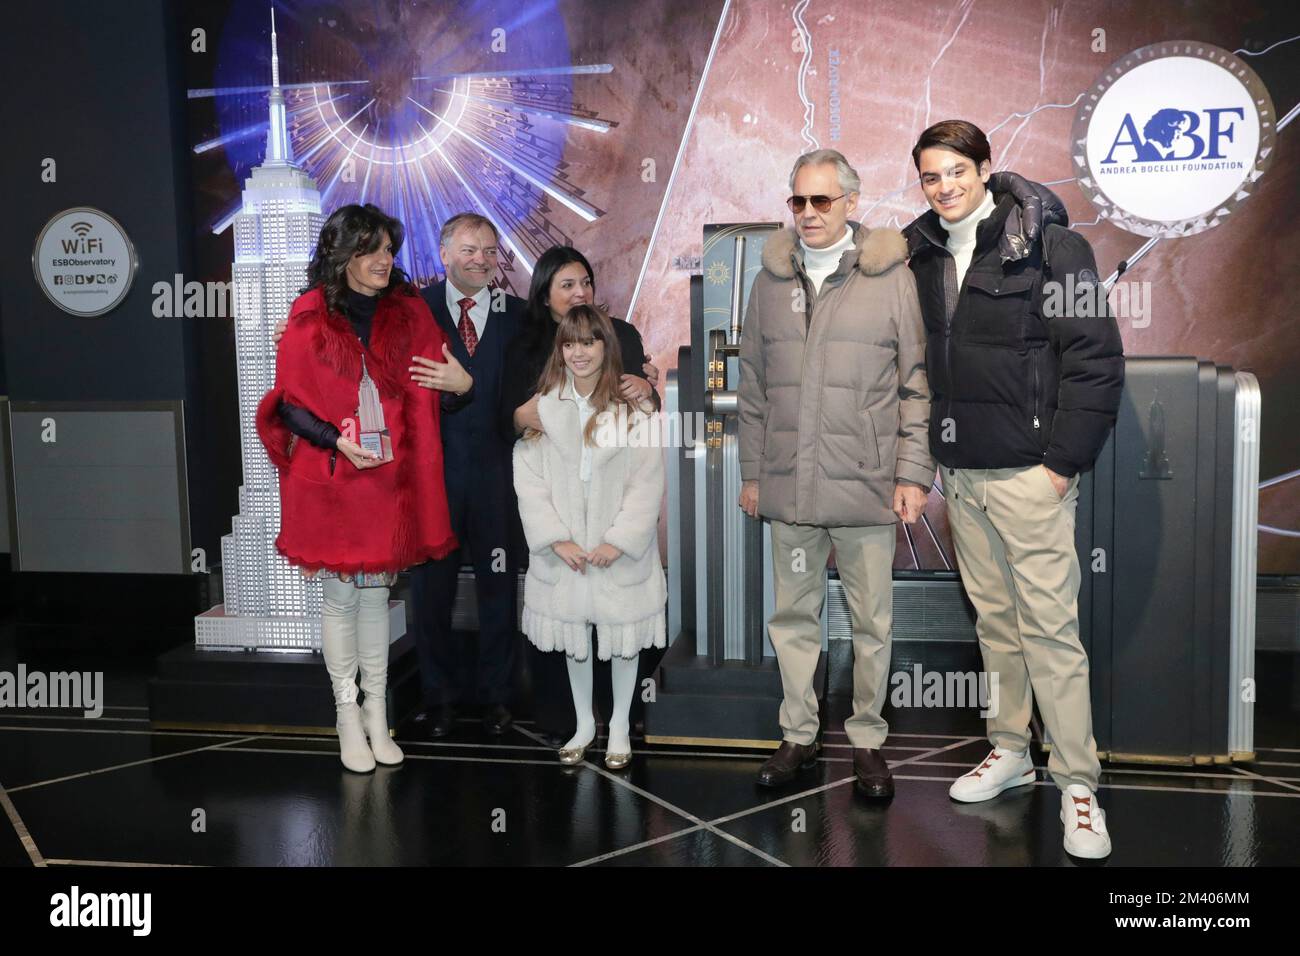 Empire State Building, New York, USA, December 12, 2022 - Andrea Bocelli, with wife Veronica Berti Bocelli and Children Matteo Bocelli, Virginia Bocelli, participate in the ceremonial lighting of the Empire State Building in honor of the Andrea Bocelli Foundations Voices of charity Today in New York City. Photo: Giada Papini Rampelotto/EuropaNewswire PHOTO CREDIT MANDATORY. Stock Photo